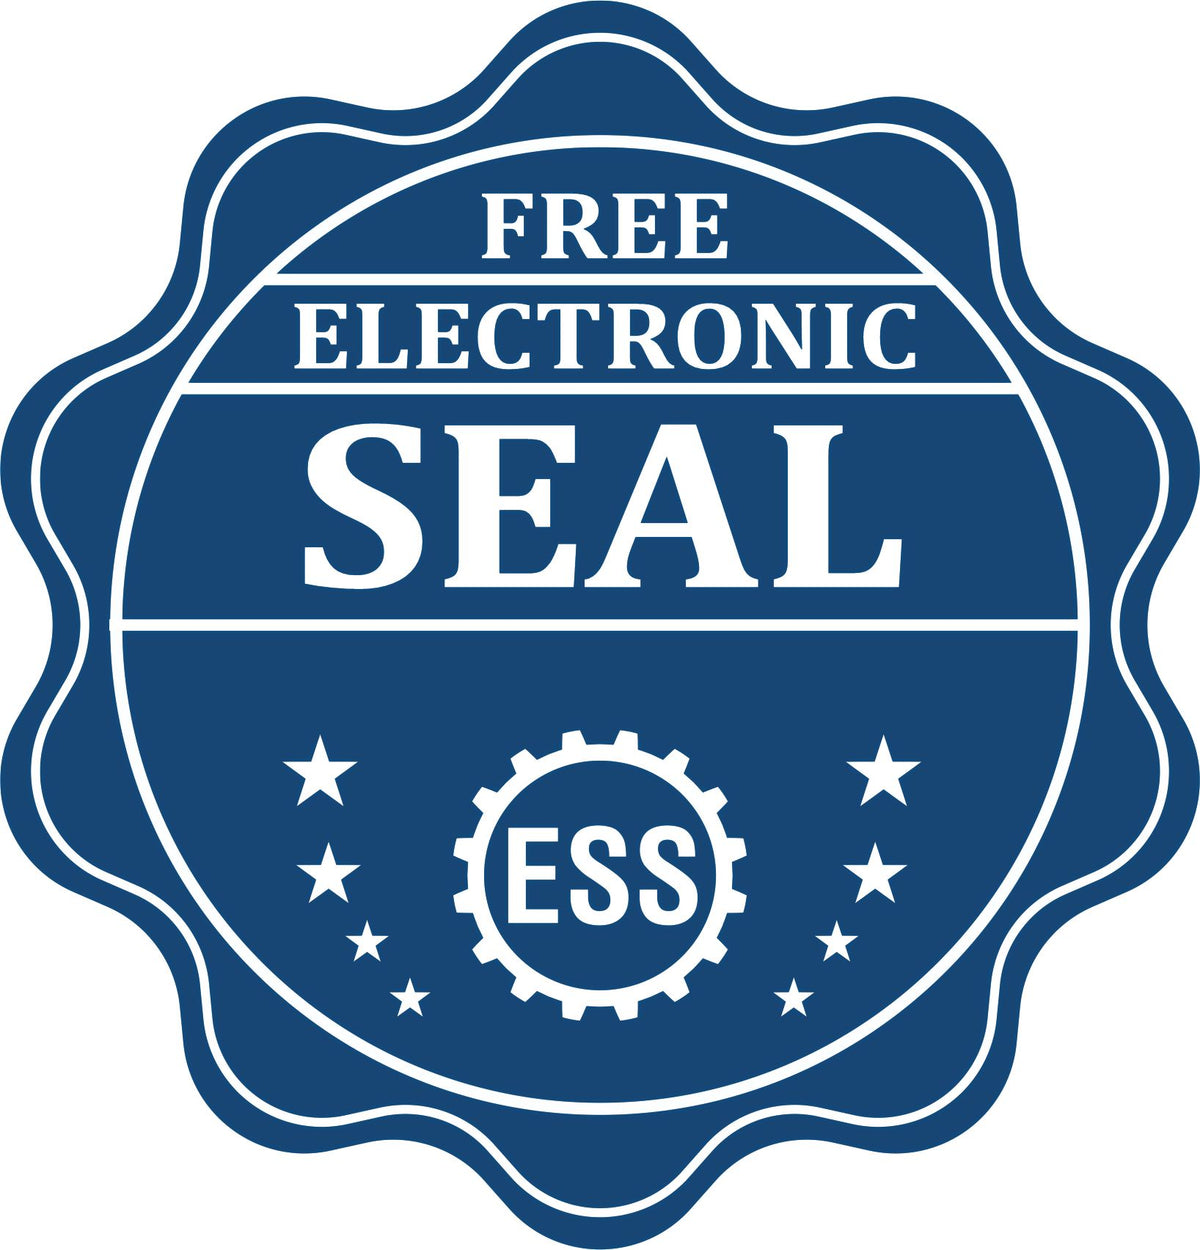 A badge showing a free electronic seal for the Premium MaxLight Pre-Inked Arizona Landscape Architectural Stamp with stars and the ESS gear on the emblem.